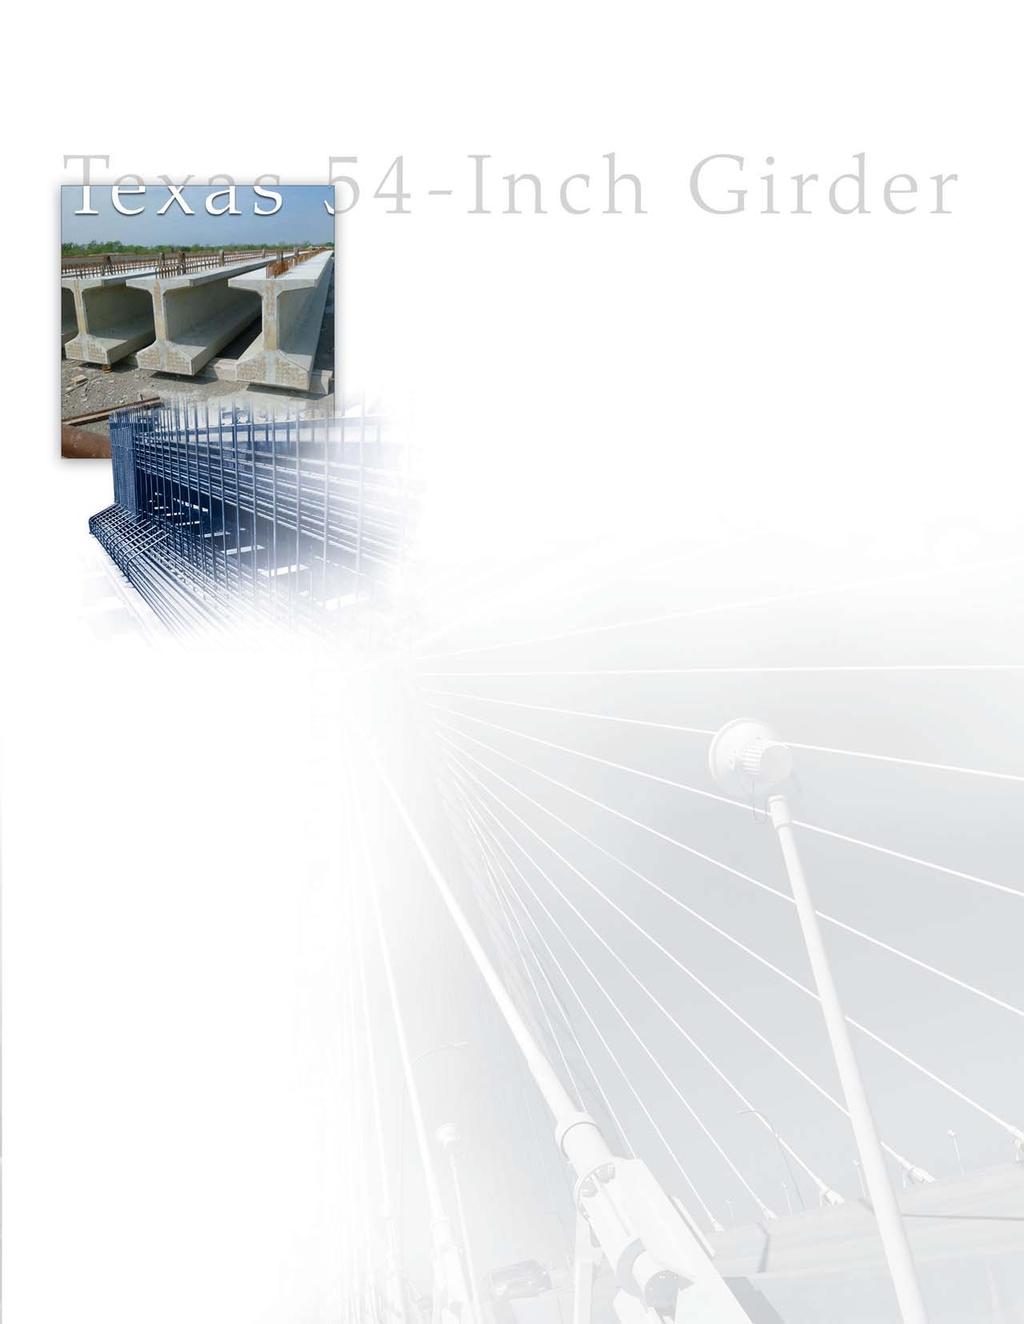 Texas 54-Inch Girder Texas 54-Inch Girder Modifying state standards can be quite simple.